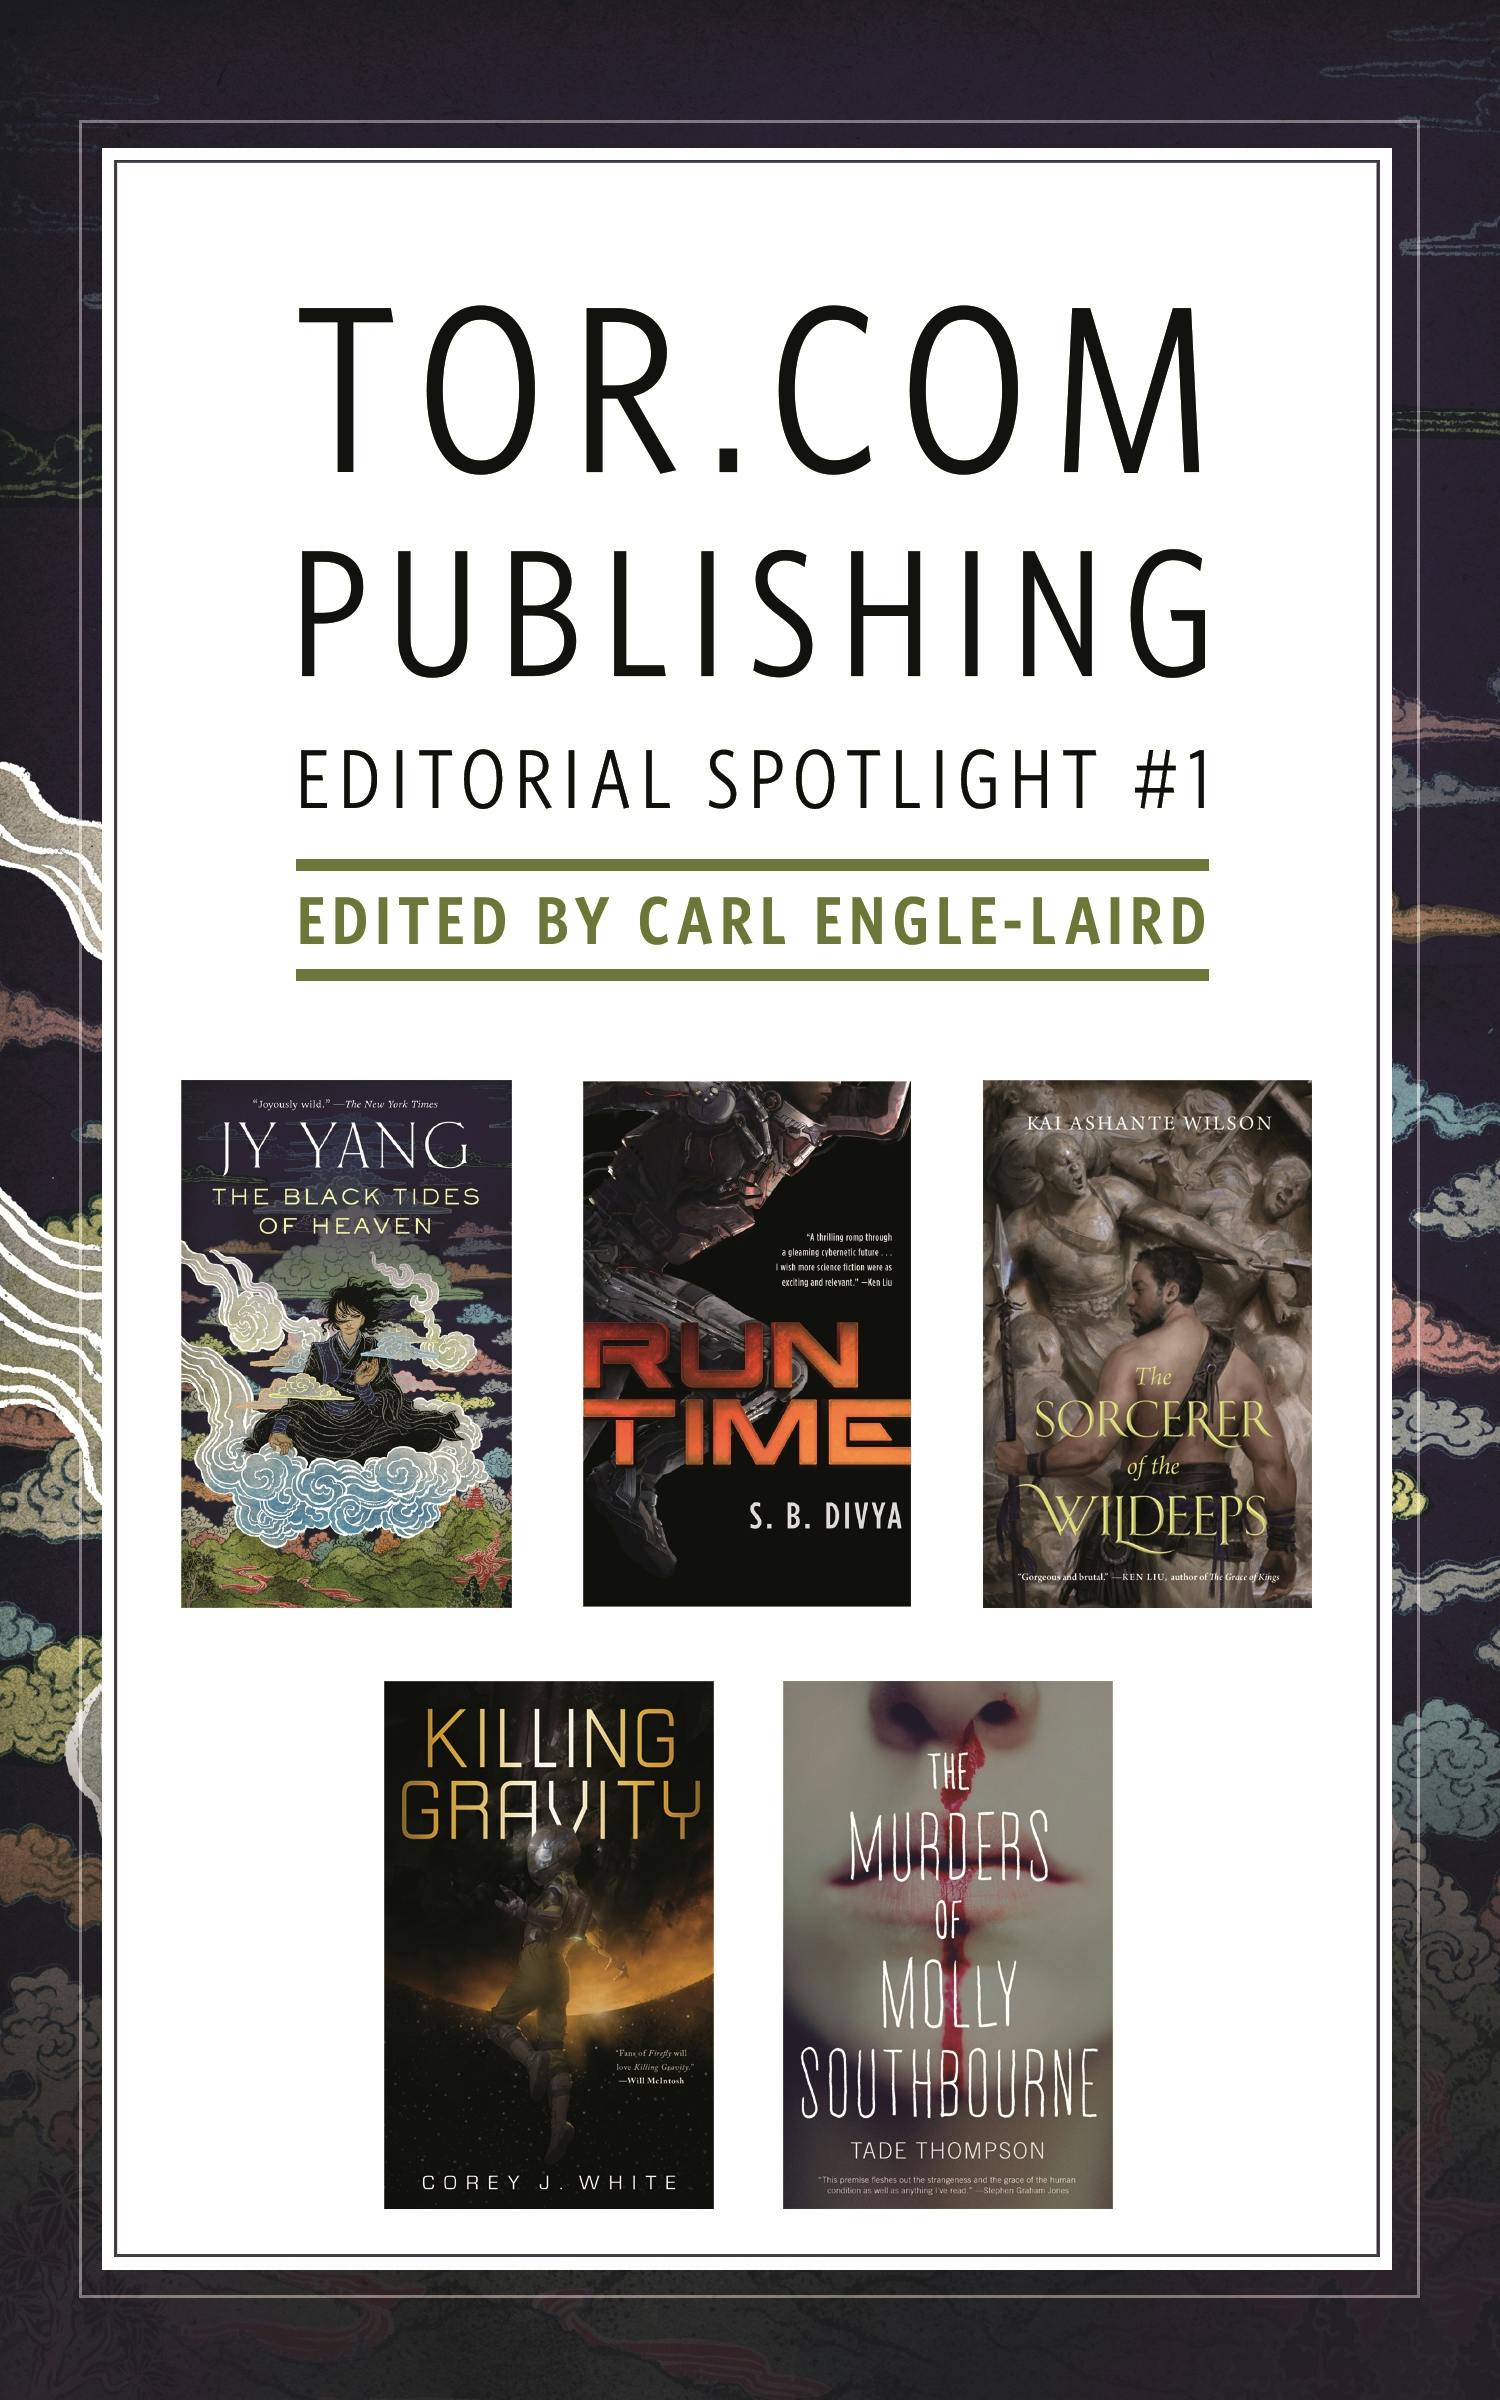 Cover for the book titled as: Tor.com Publishing Editorial Spotlight #1